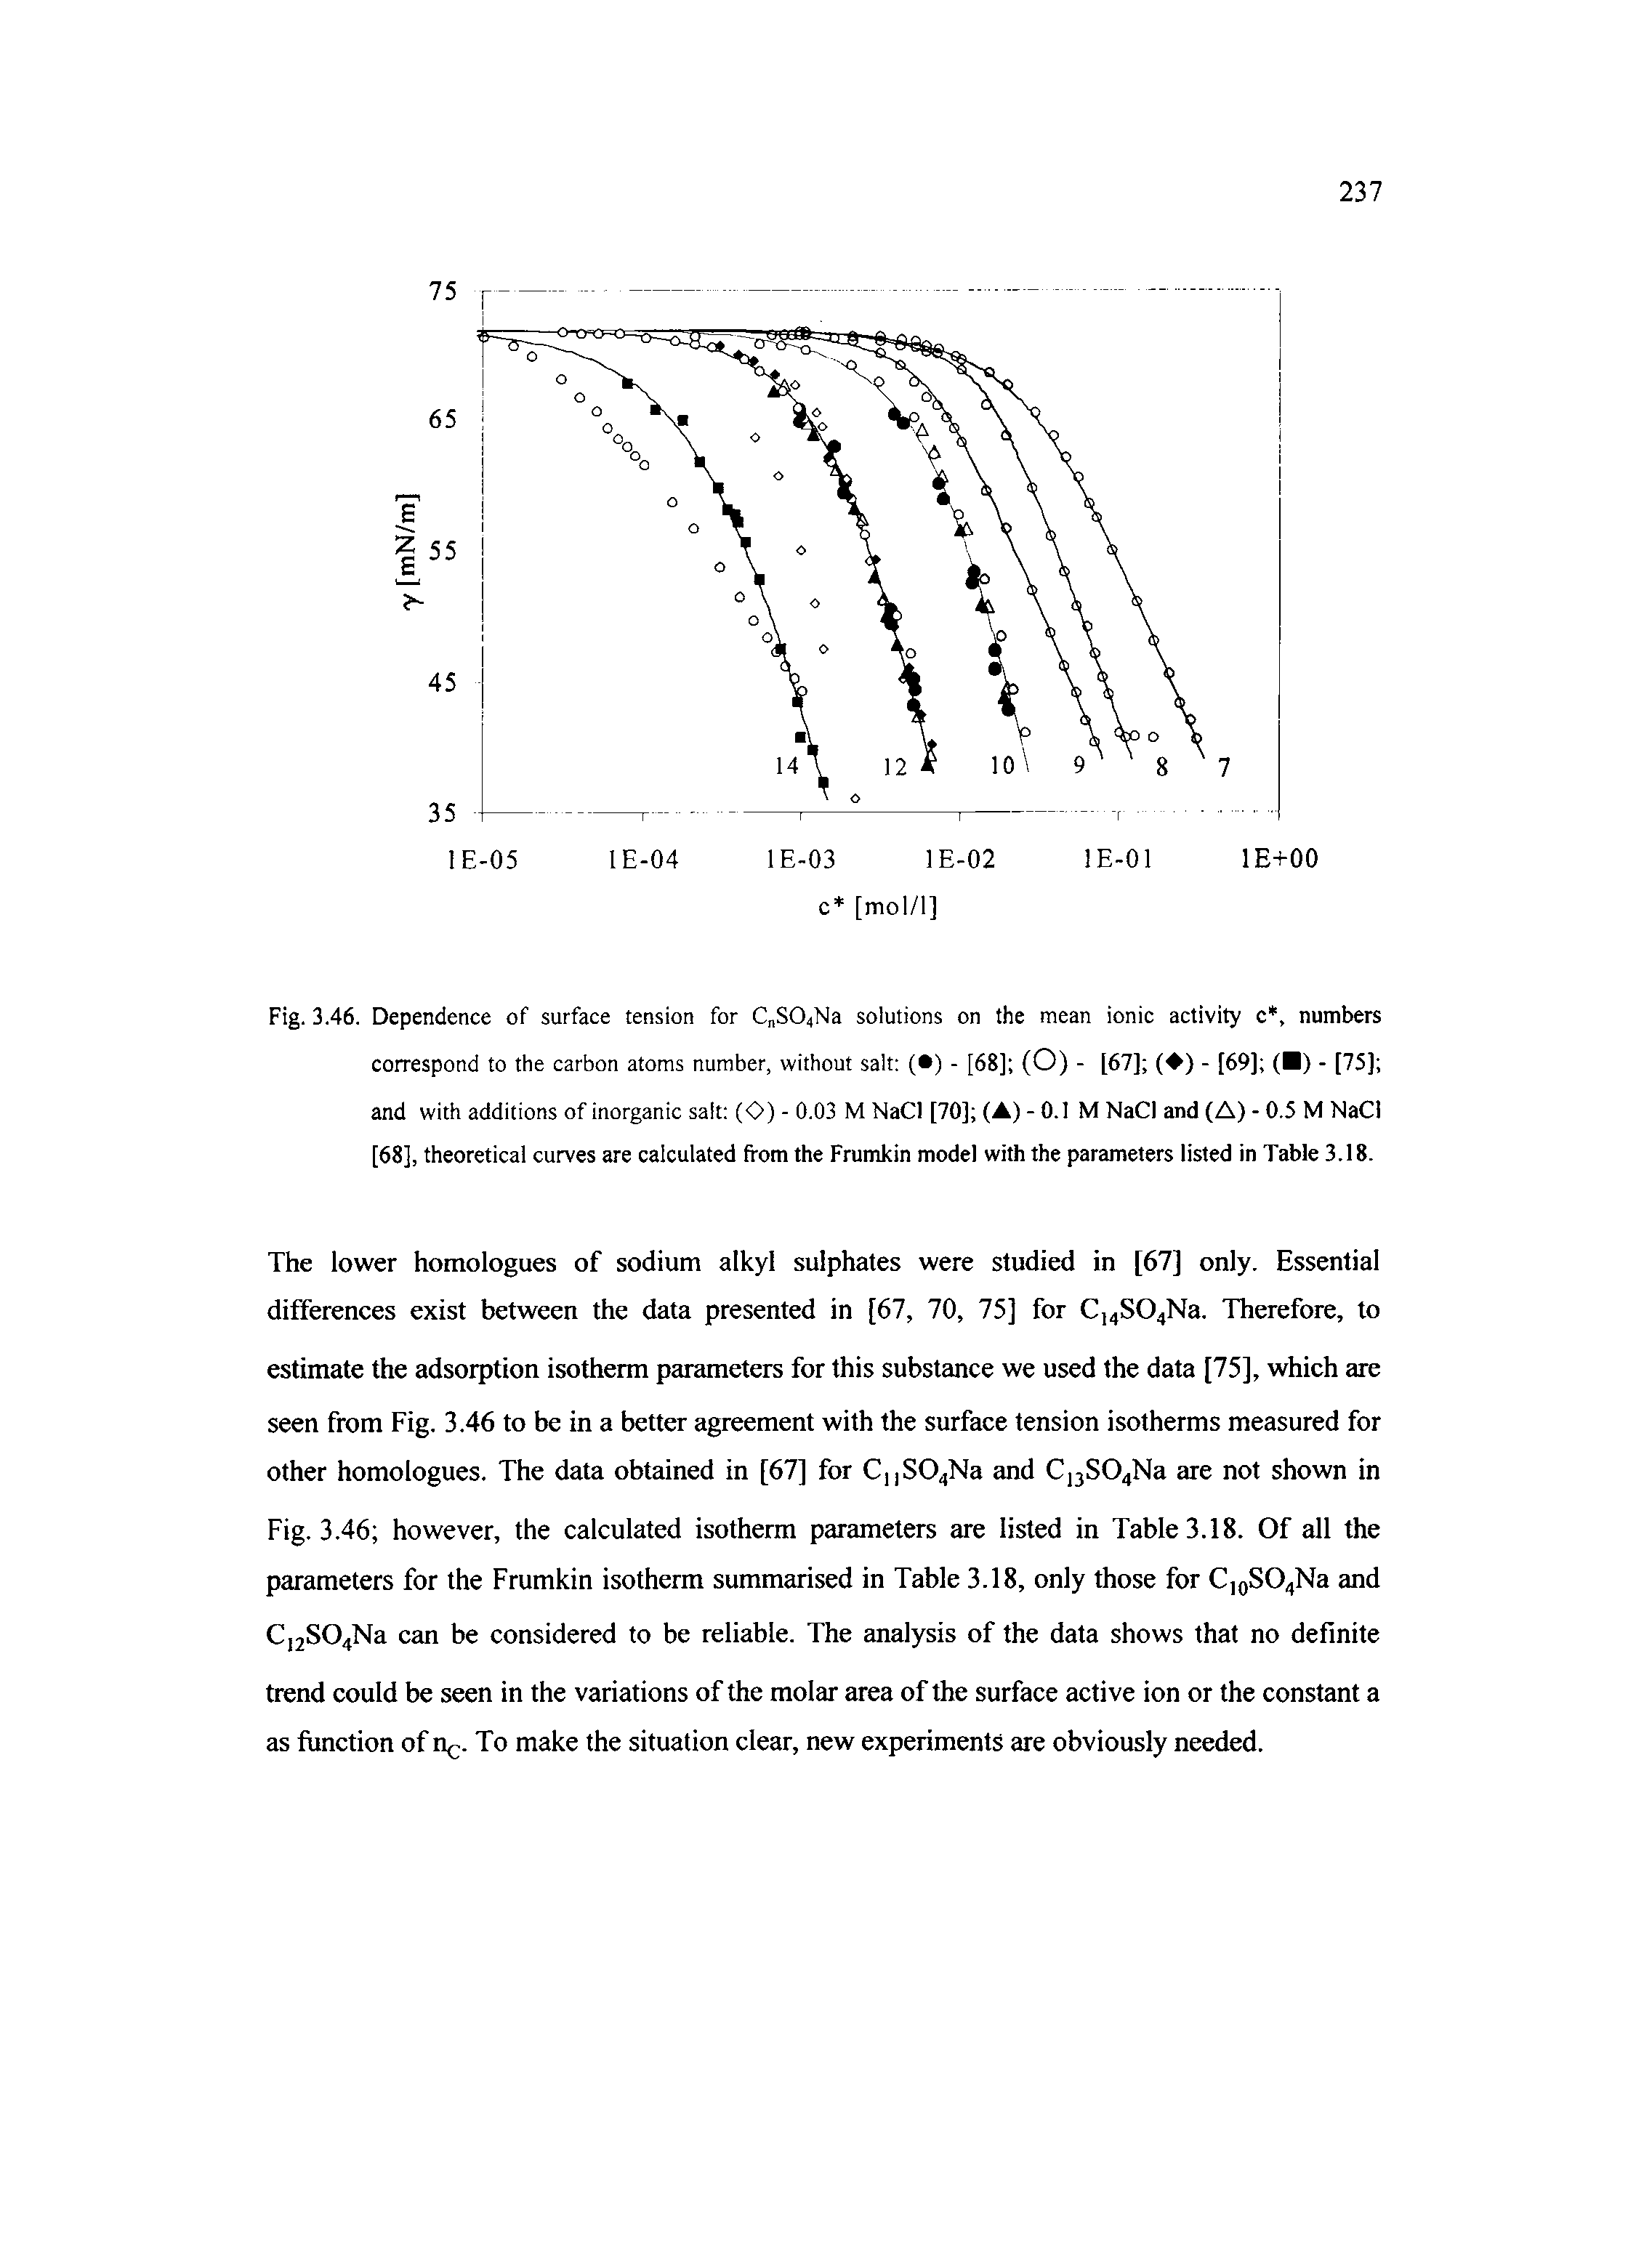 Fig. 3.46. Dependence of surface tension for C S04Na solutions on the mean ionic activity c, numbers correspond to the carbon atoms number, without salt ( ) - [68] (O) - [67] ( ) - [69] ( ) - [75] and with additions of inorganic salt (O) - 0.03 M NaCl [70] (A) - 0.1 M NaCI and (A) - 0.5 M NaCl [68], theoretical curves are calculated from the Frumkin model with the parameters listed in Table 3.18.